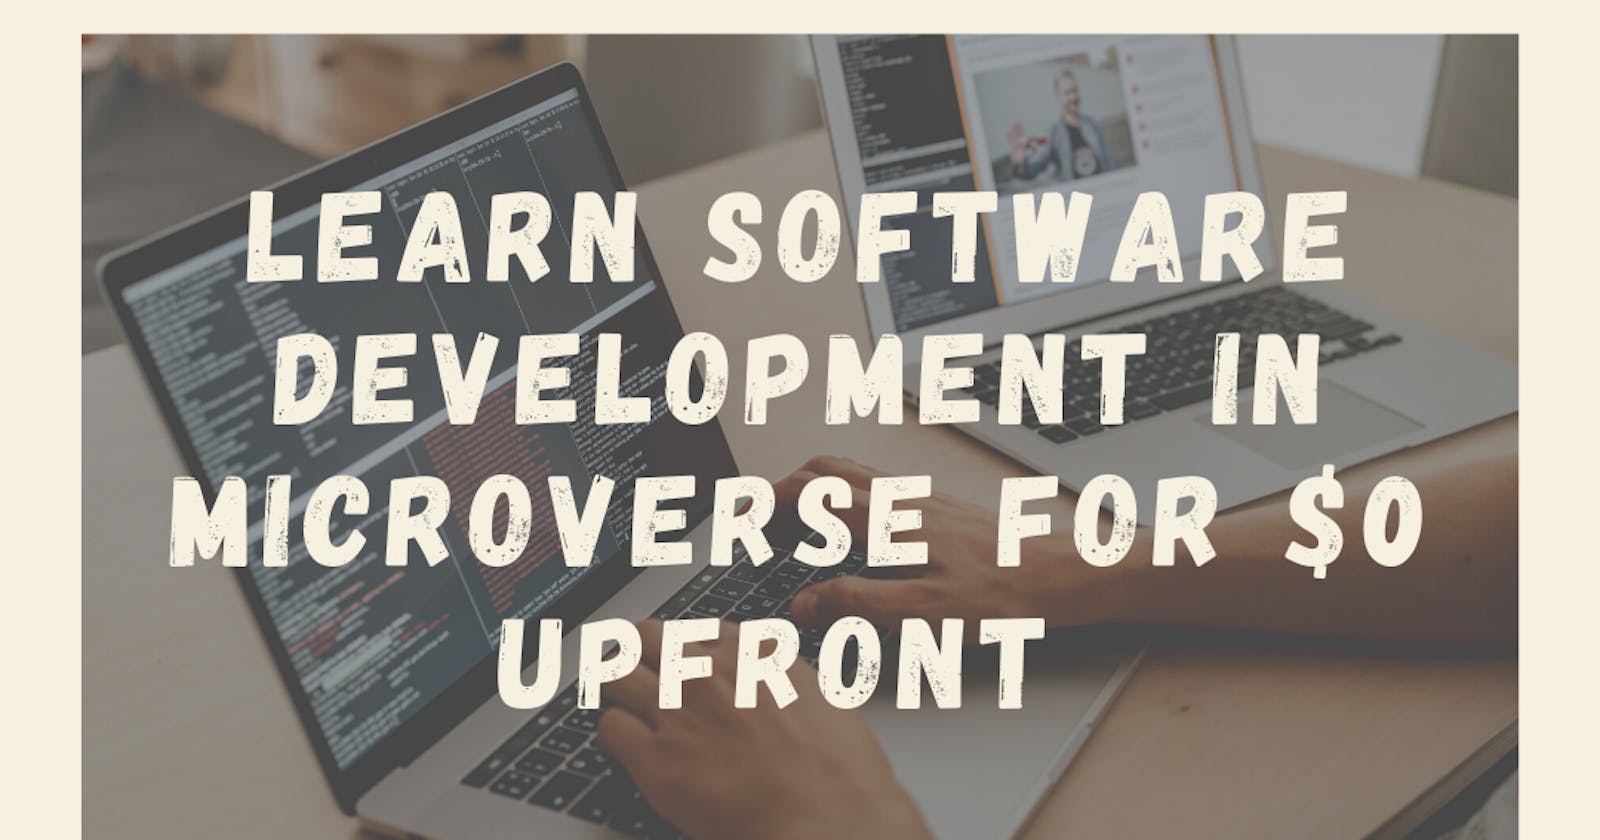 Learn Software Development For $0 Upfront In Microverse